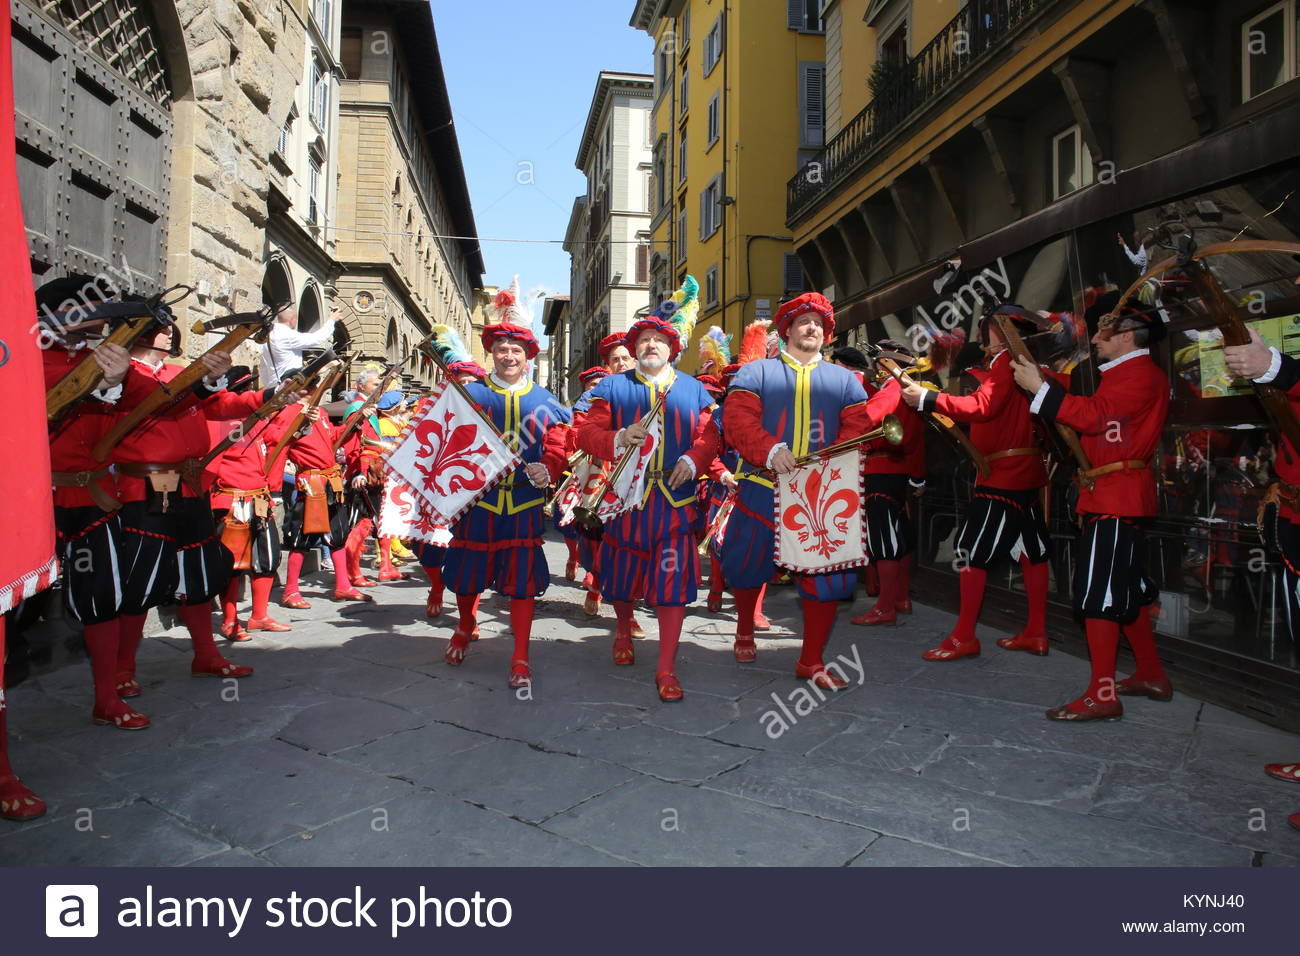 Participants in The Explosion of the Cart festival march through Florence in bright costumes at the end of the day. Stock Photo